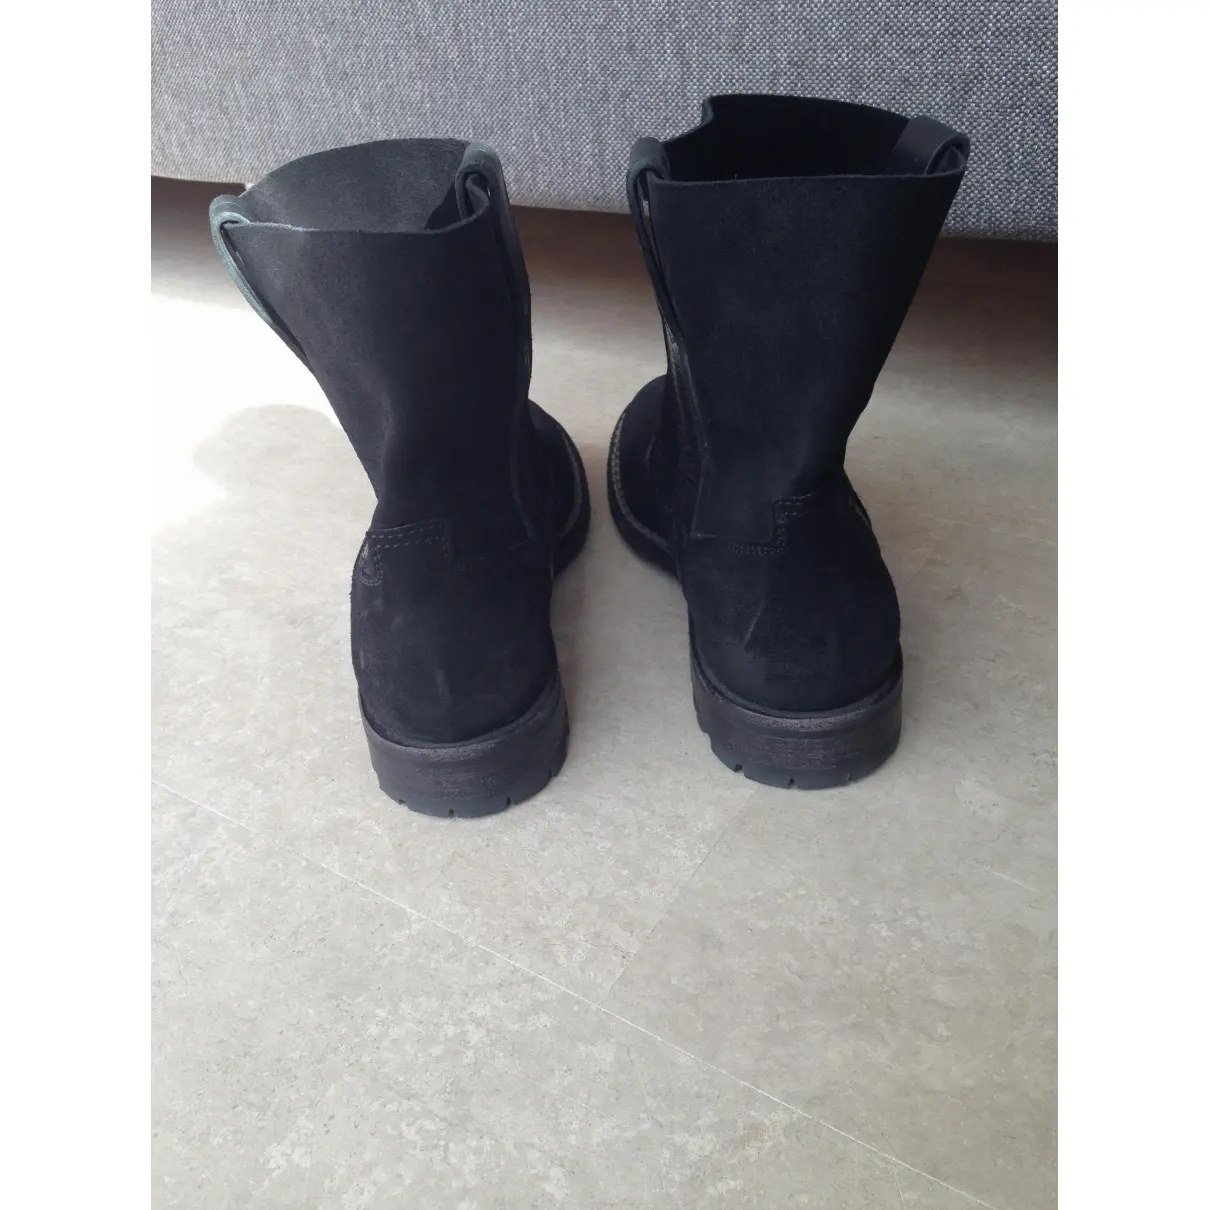 Luxury N.D.C. Made by Hand Boots Women